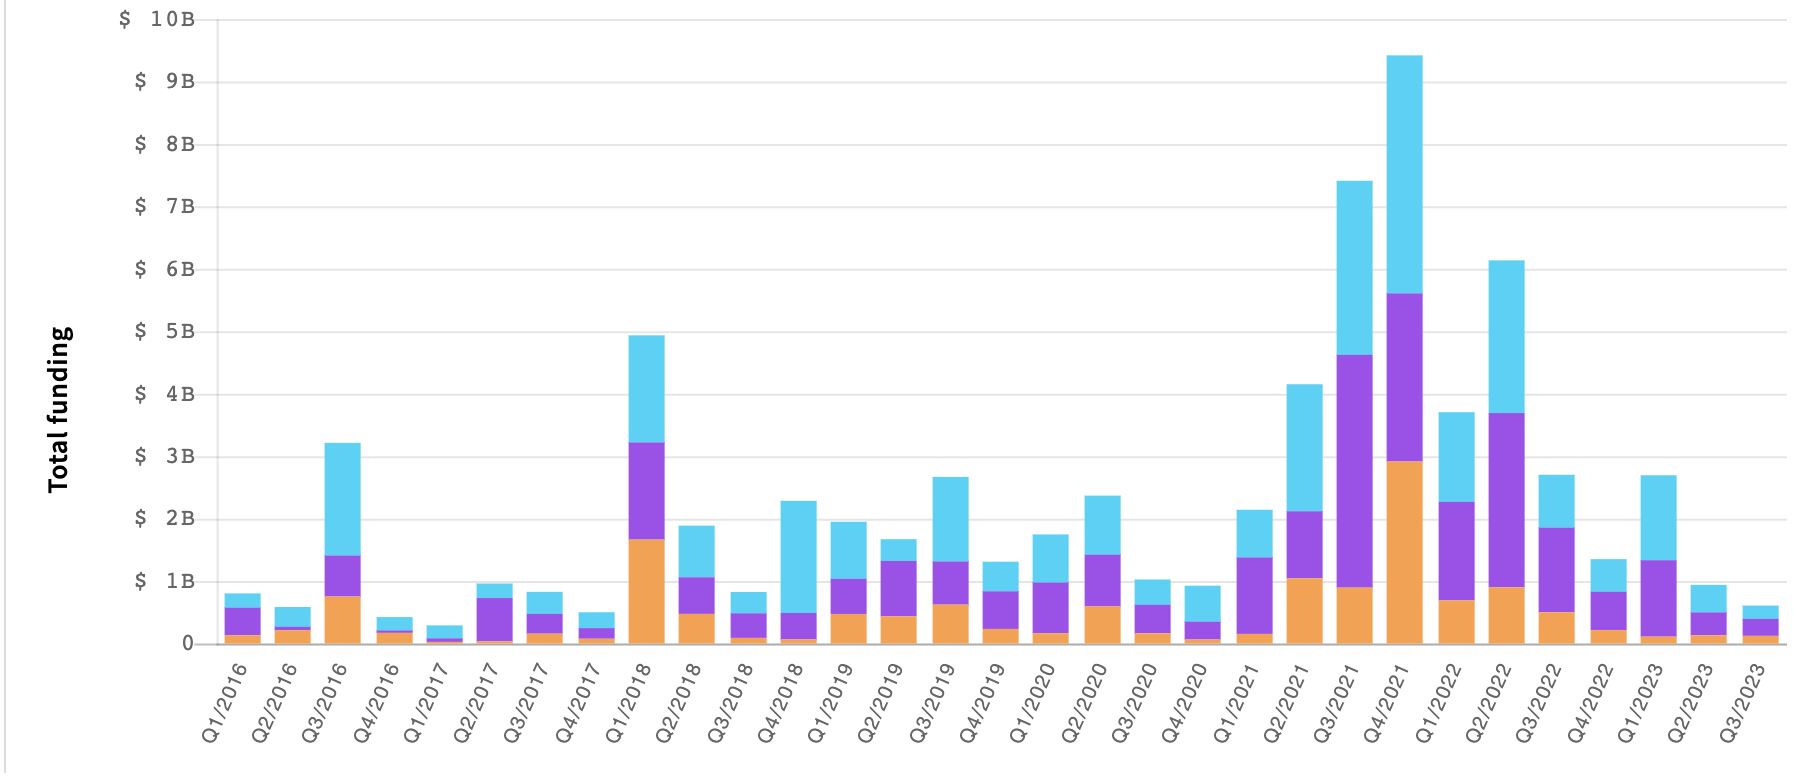 Finance is leading the way. From Insignia's Private Market Statistics tool. Blue is commerce, Purple is finance, orange is consumer.